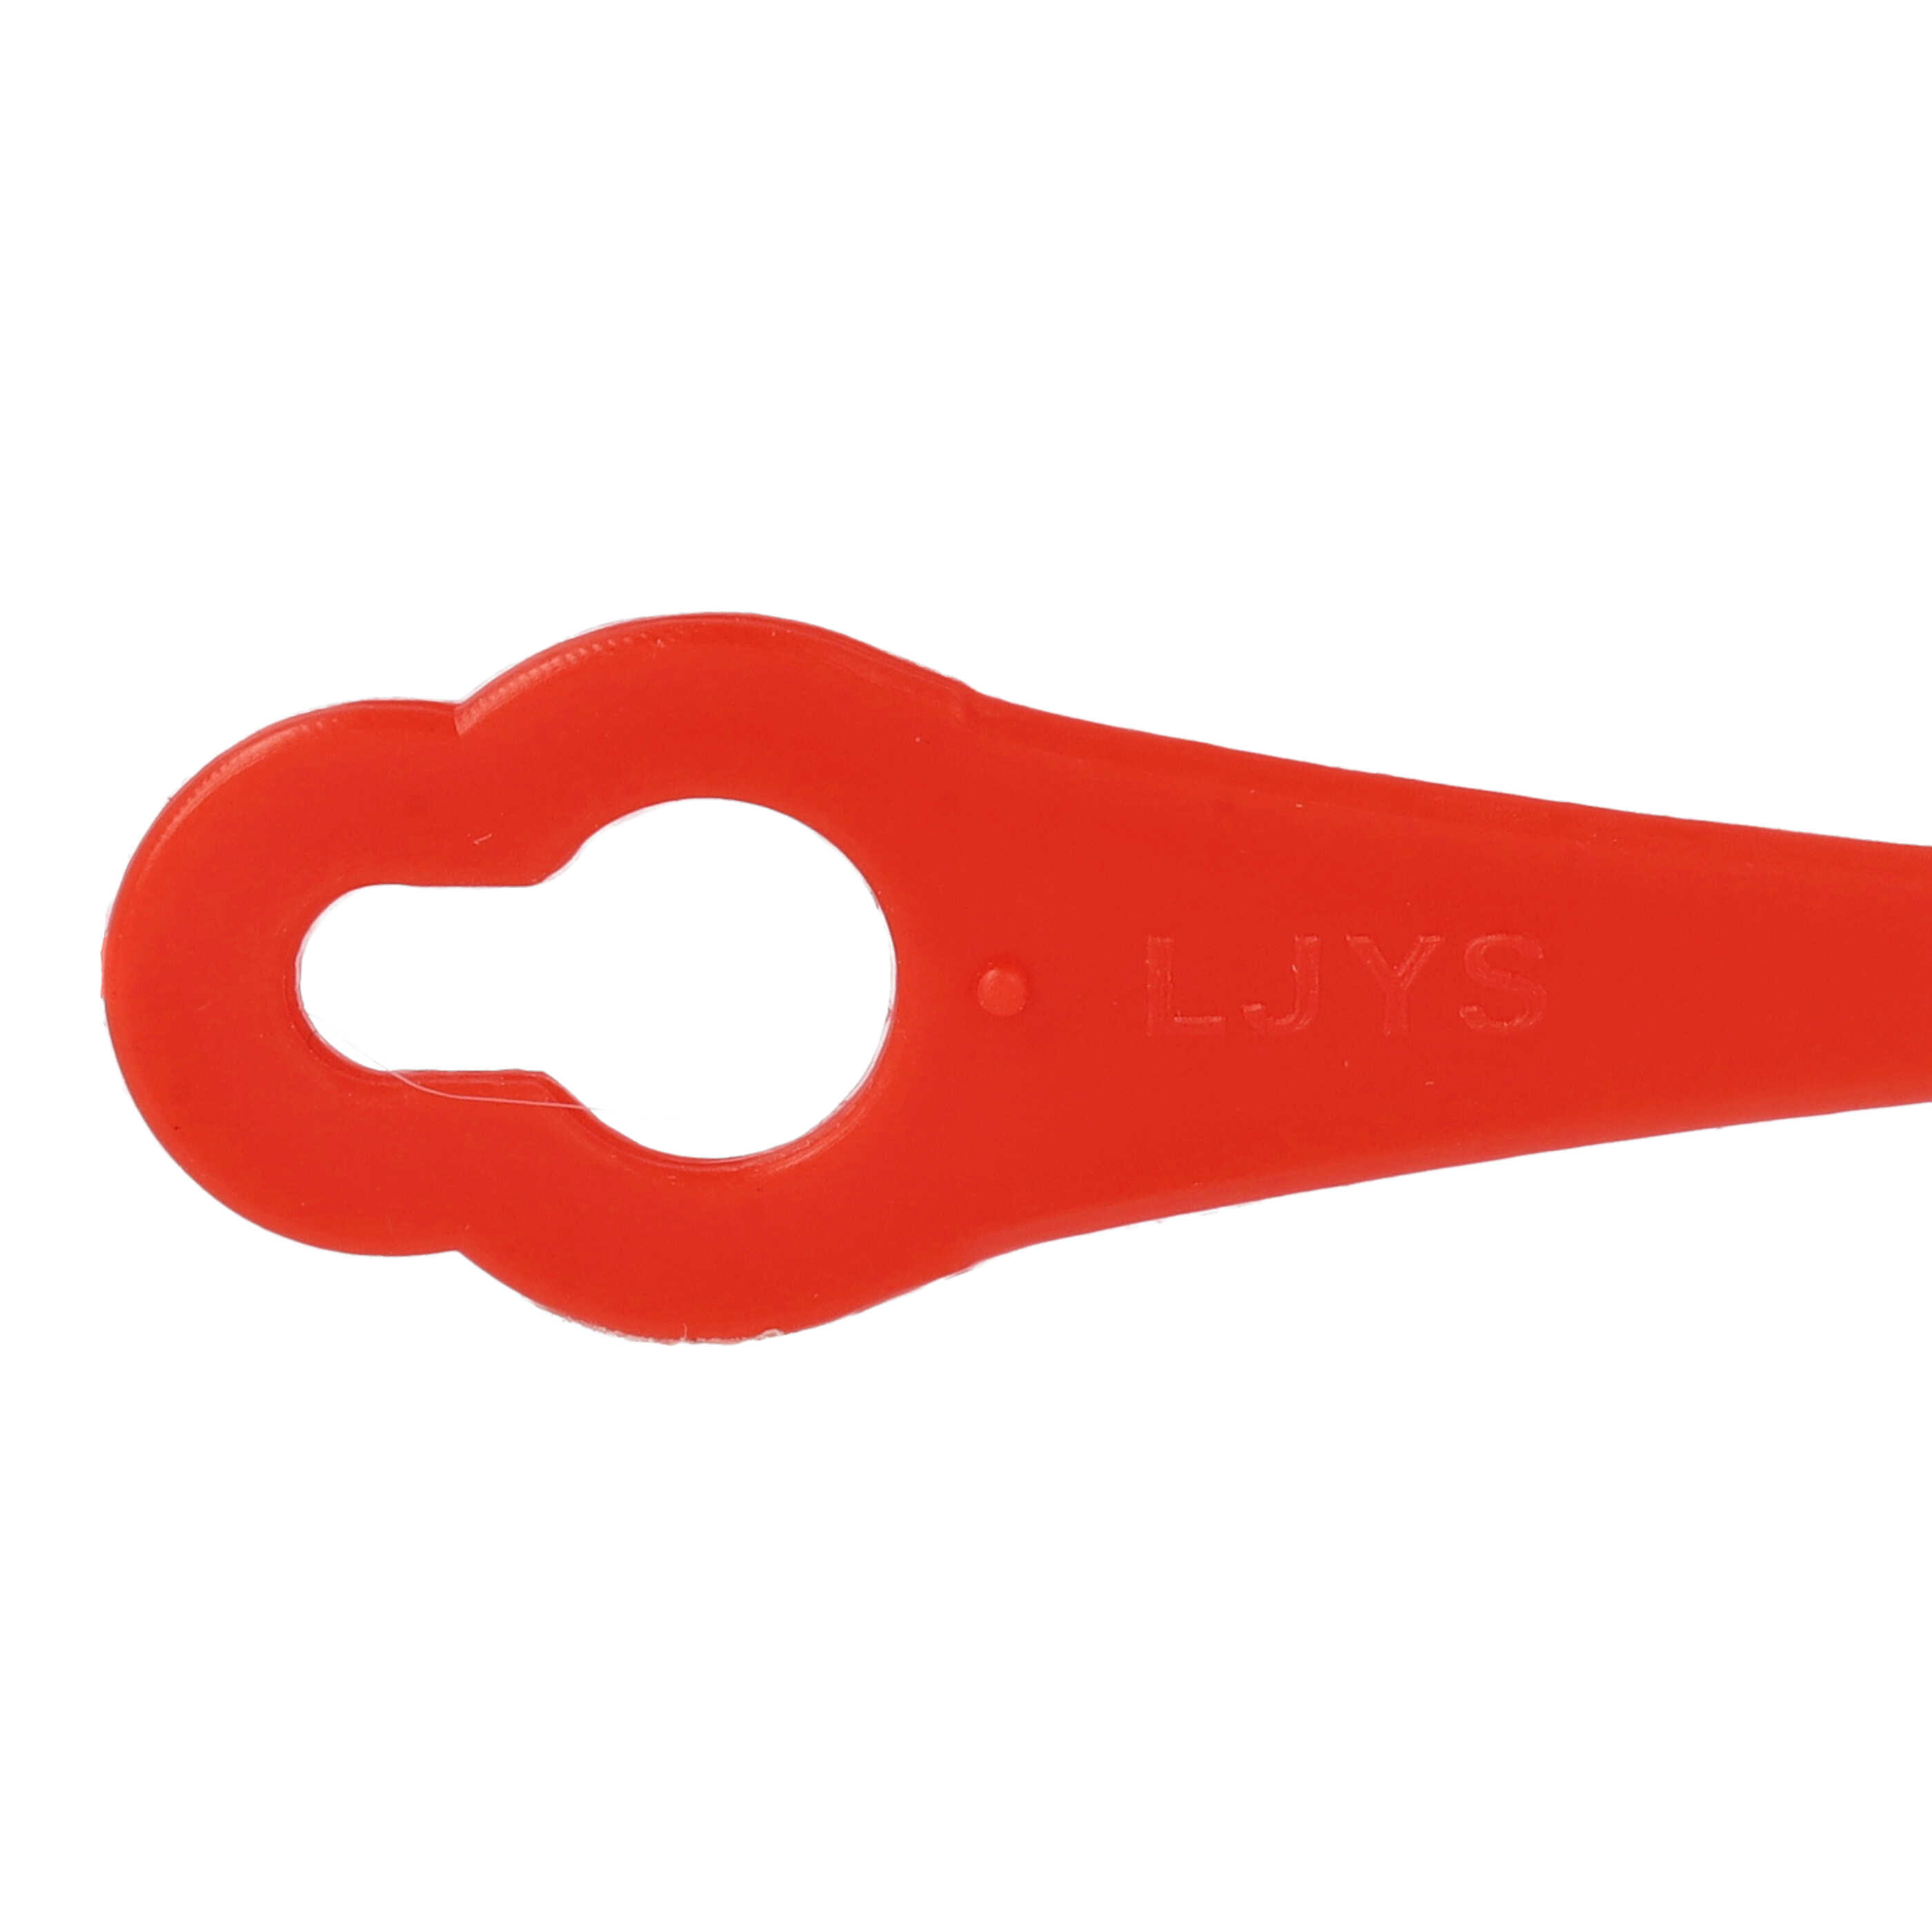 50x Exchange Blade replaces Grizzly 91094326 for Cordless Lawnmower etc. - polyamide, red